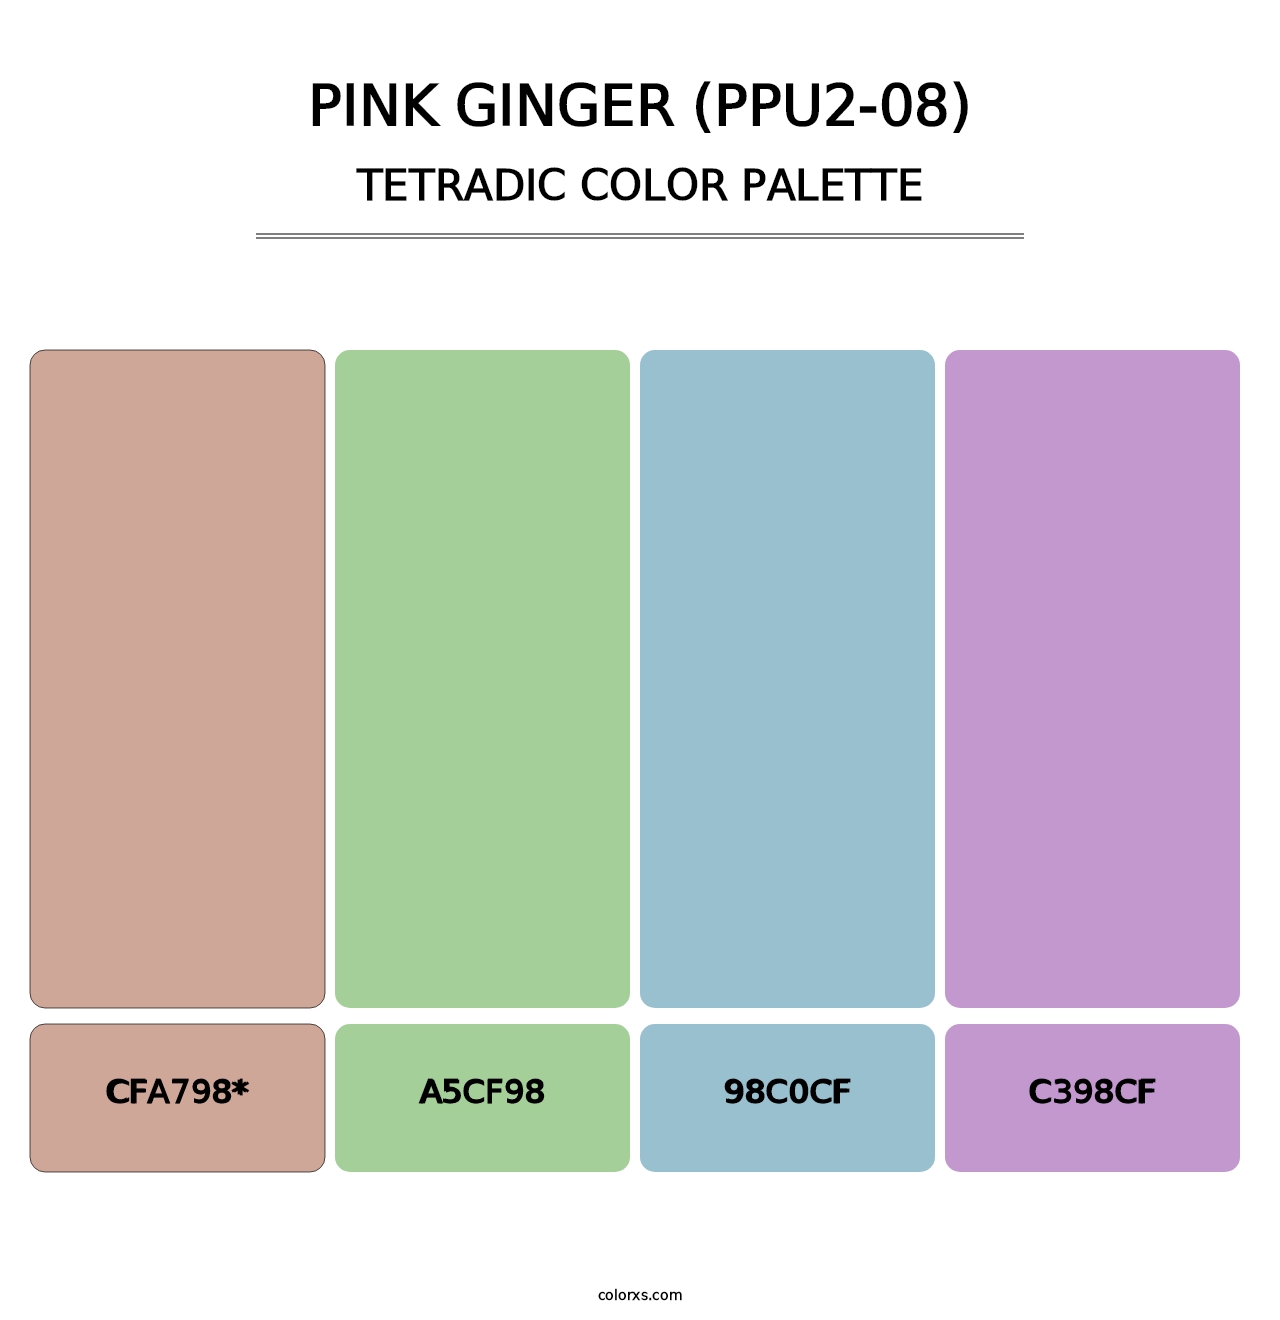 Pink Ginger (PPU2-08) - Tetradic Color Palette